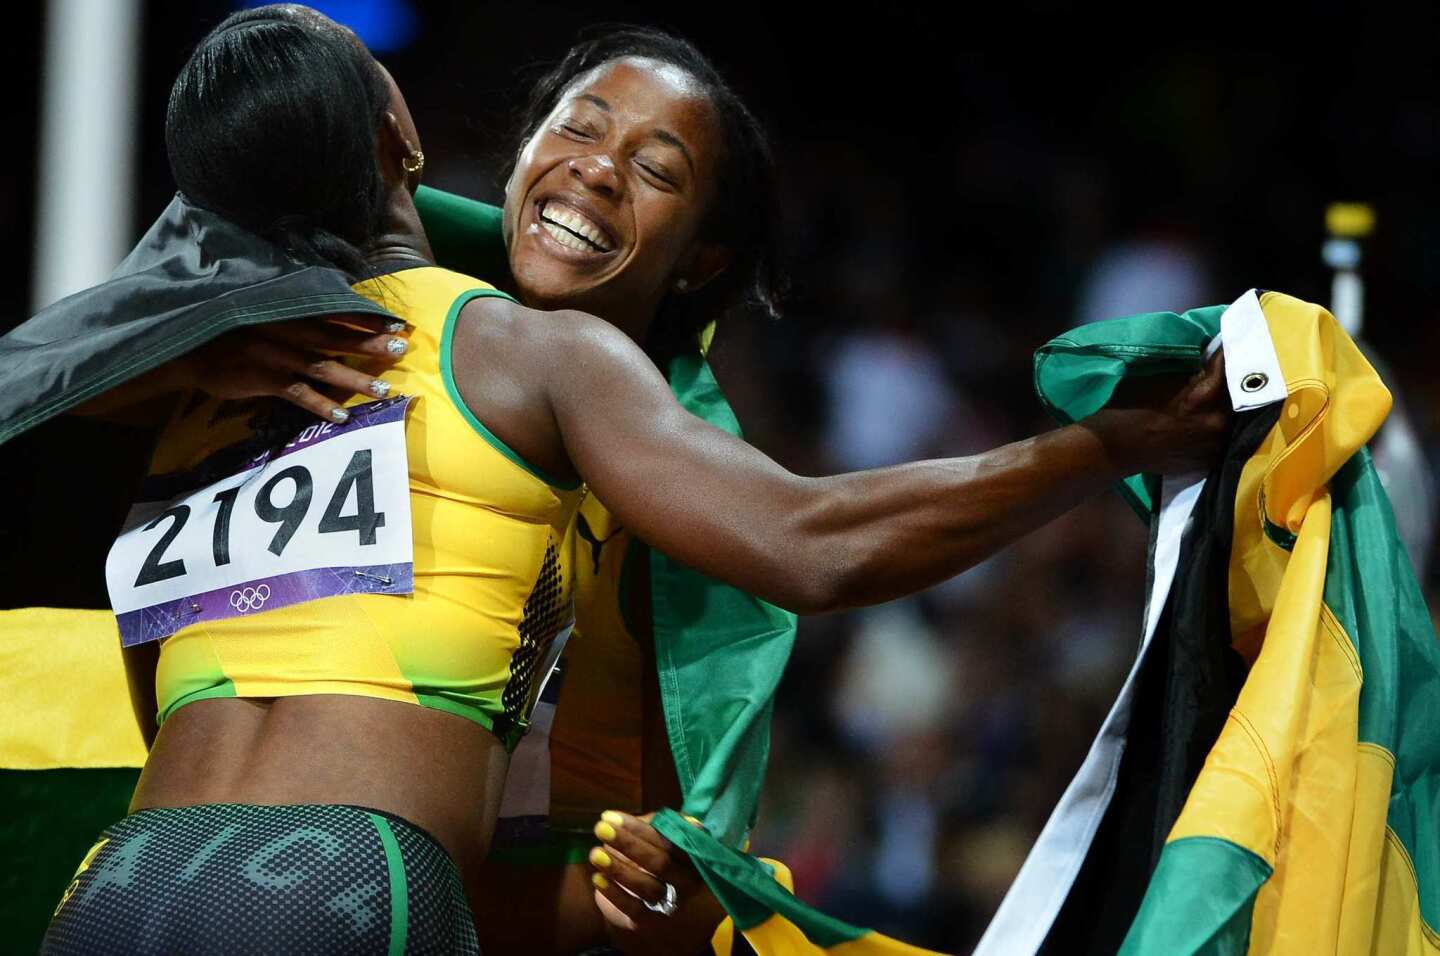 Gold medal winner Shelly-Ann Fraser-Pryce, right, and bronze medal winner Veronica Campbell-Brown embrace after the 100-meter finals. Both are from Jamaica.